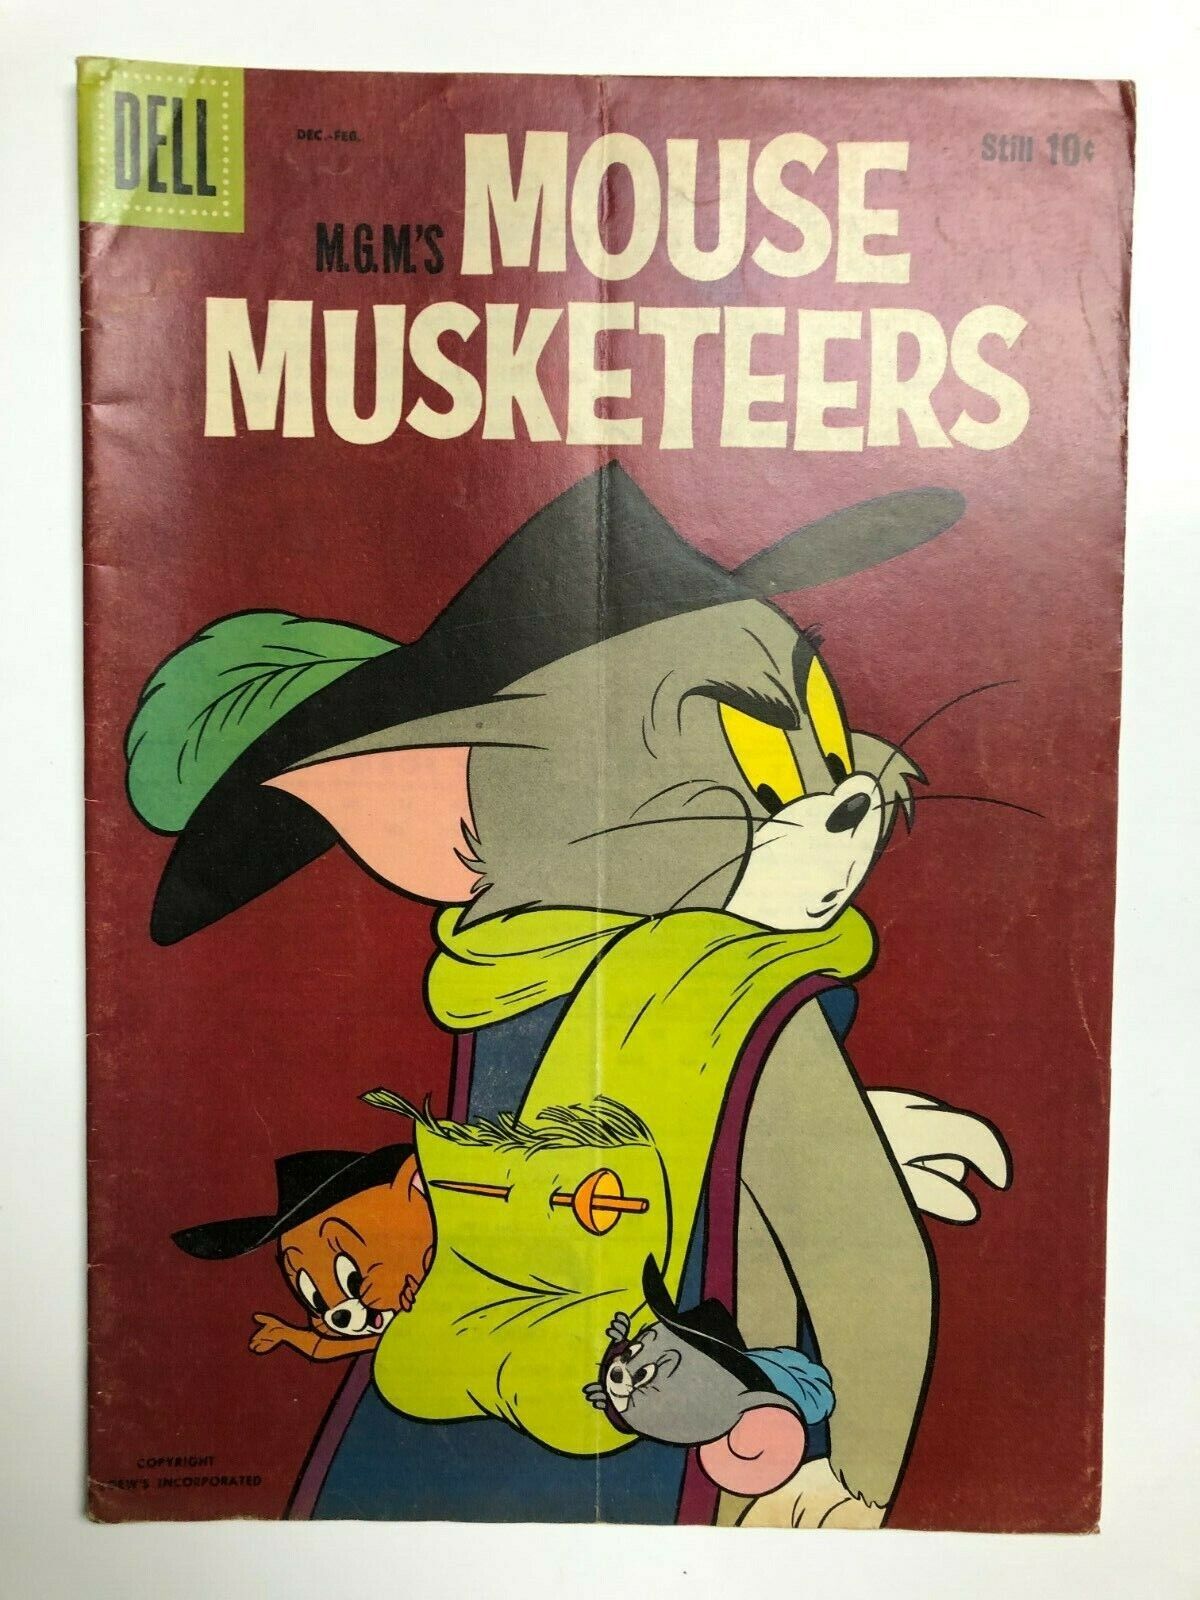 M.G.M\'s Mouse Musketeers #16 Dec-Feb 1959, Dell)